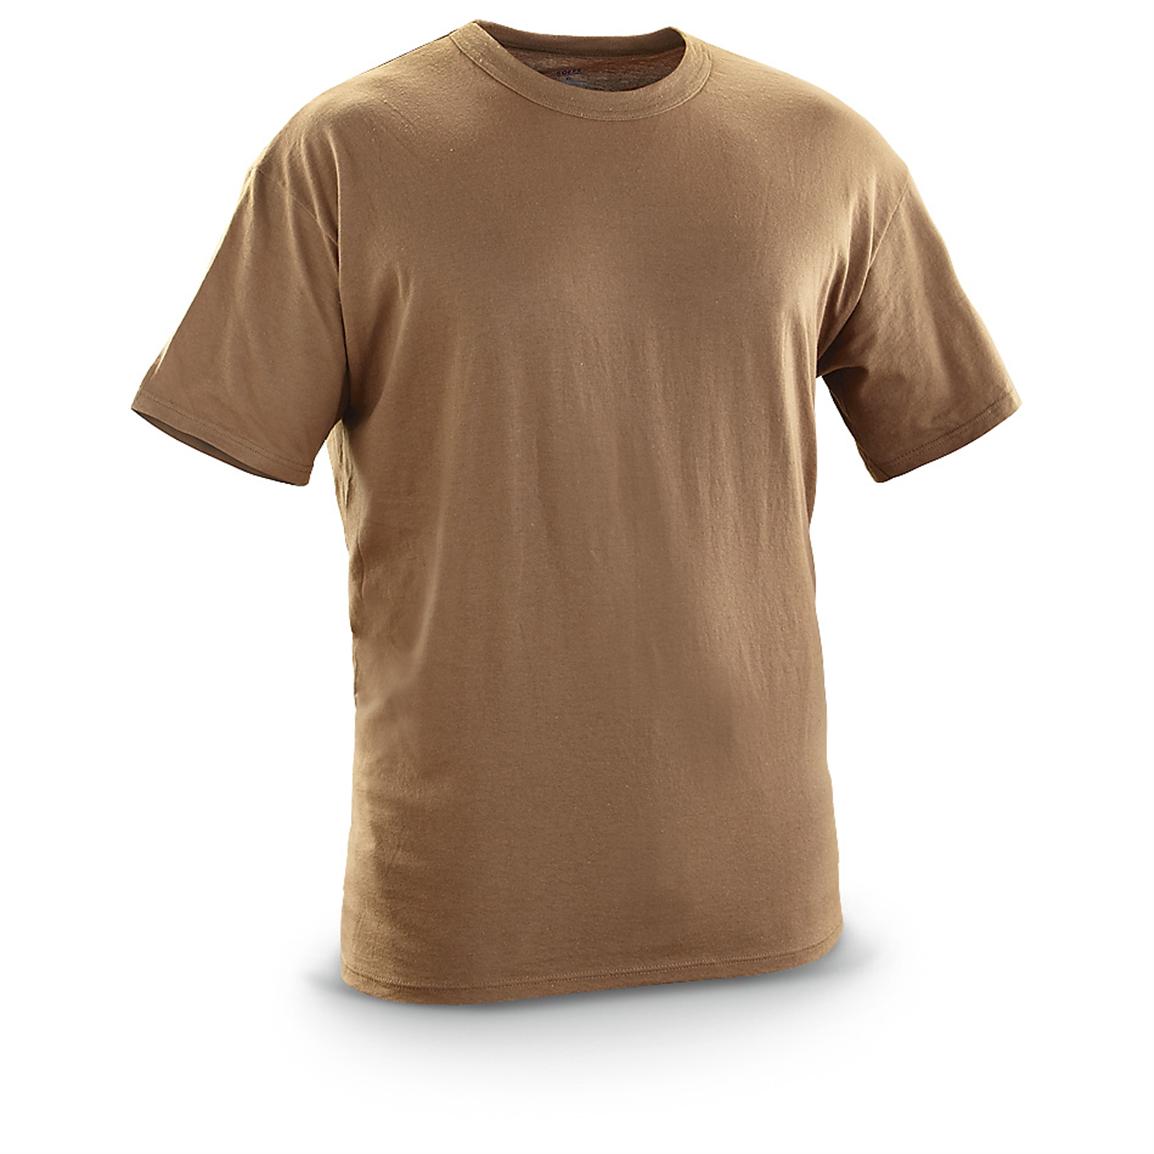 6 - Pk. of New U.S. Military T - shirts, Army Brown - 282314, Military ...